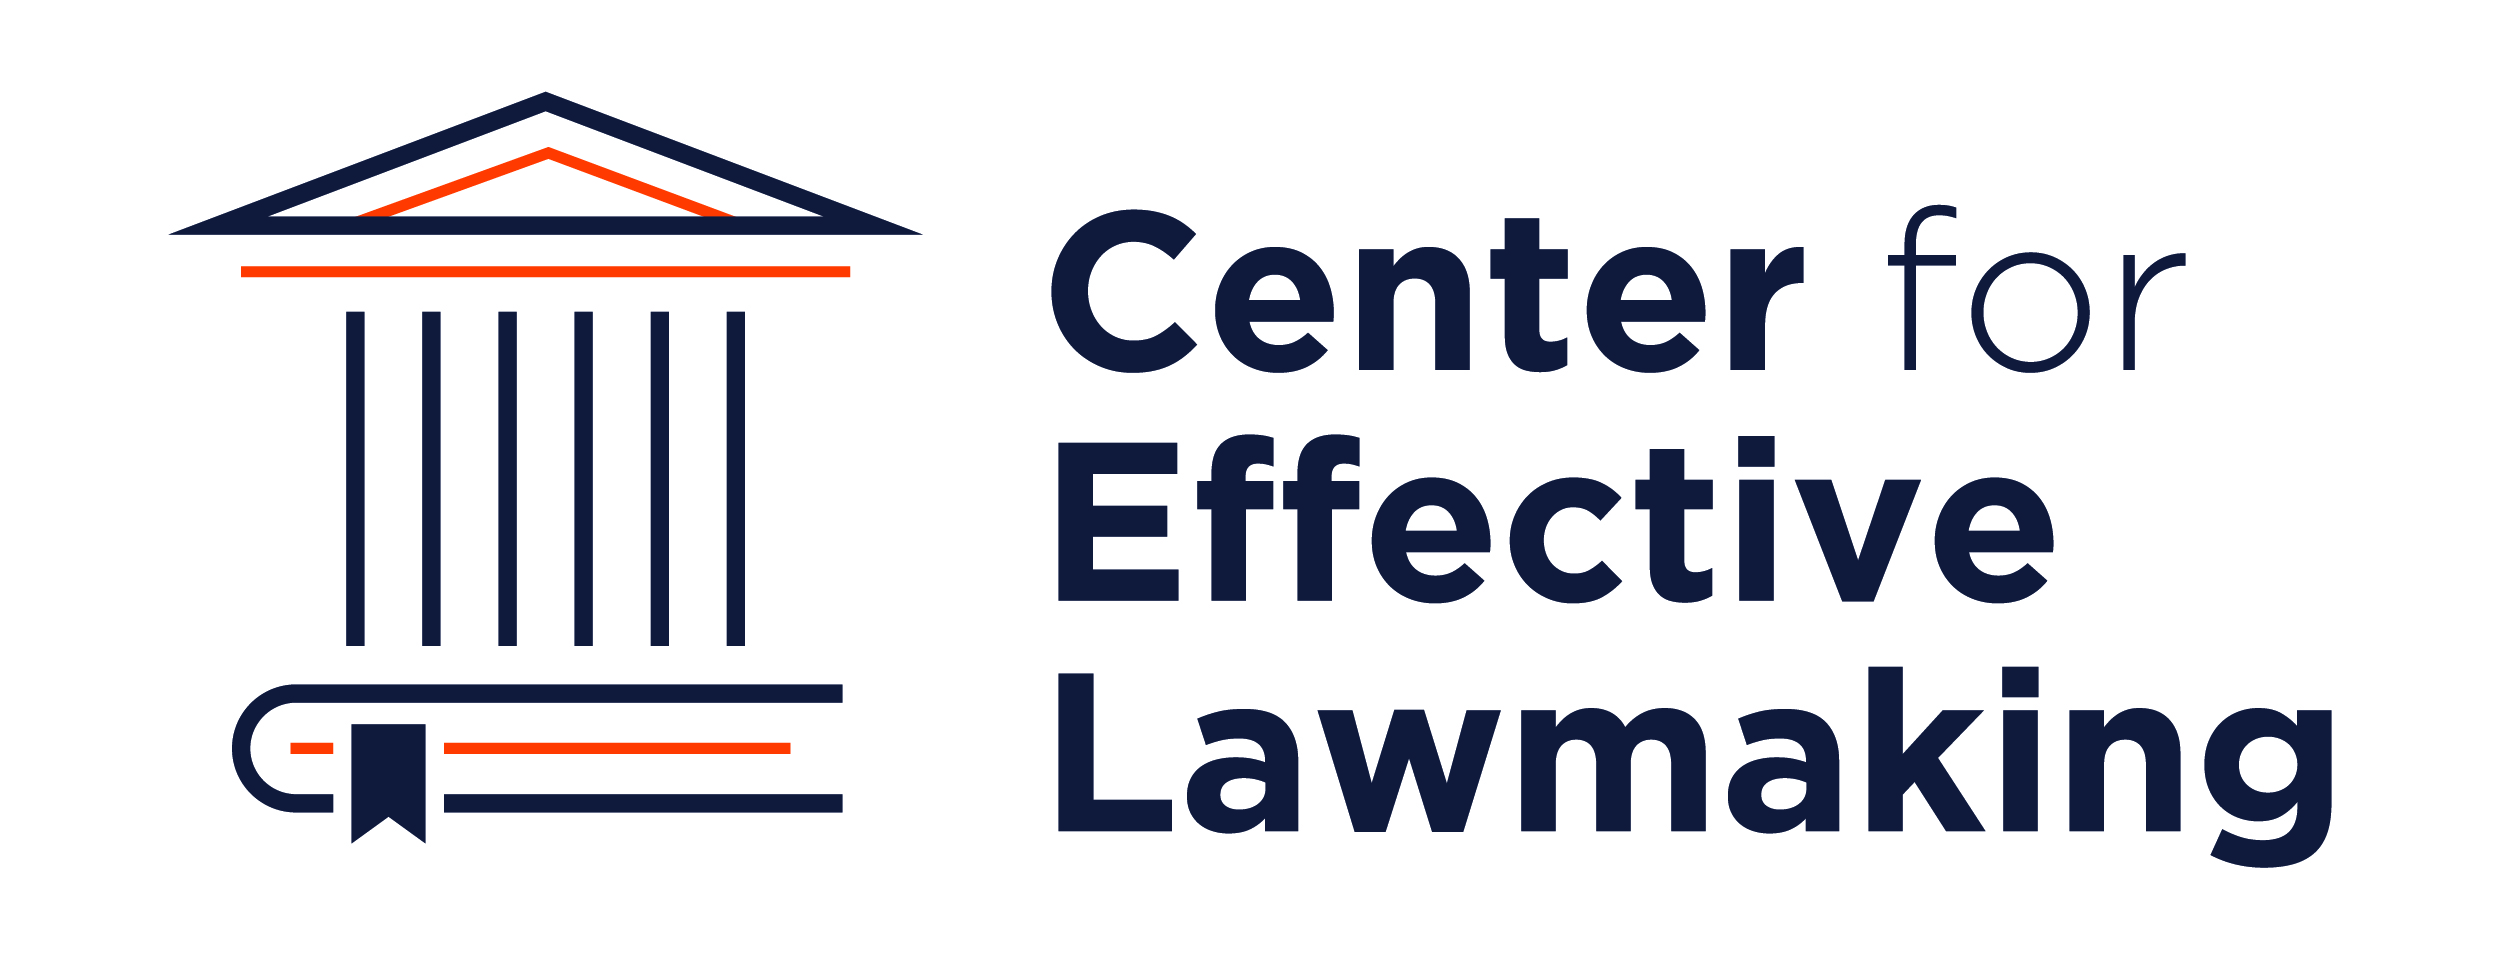 The CEL’s 2022 Award for Best Publication on Effective Lawmaking